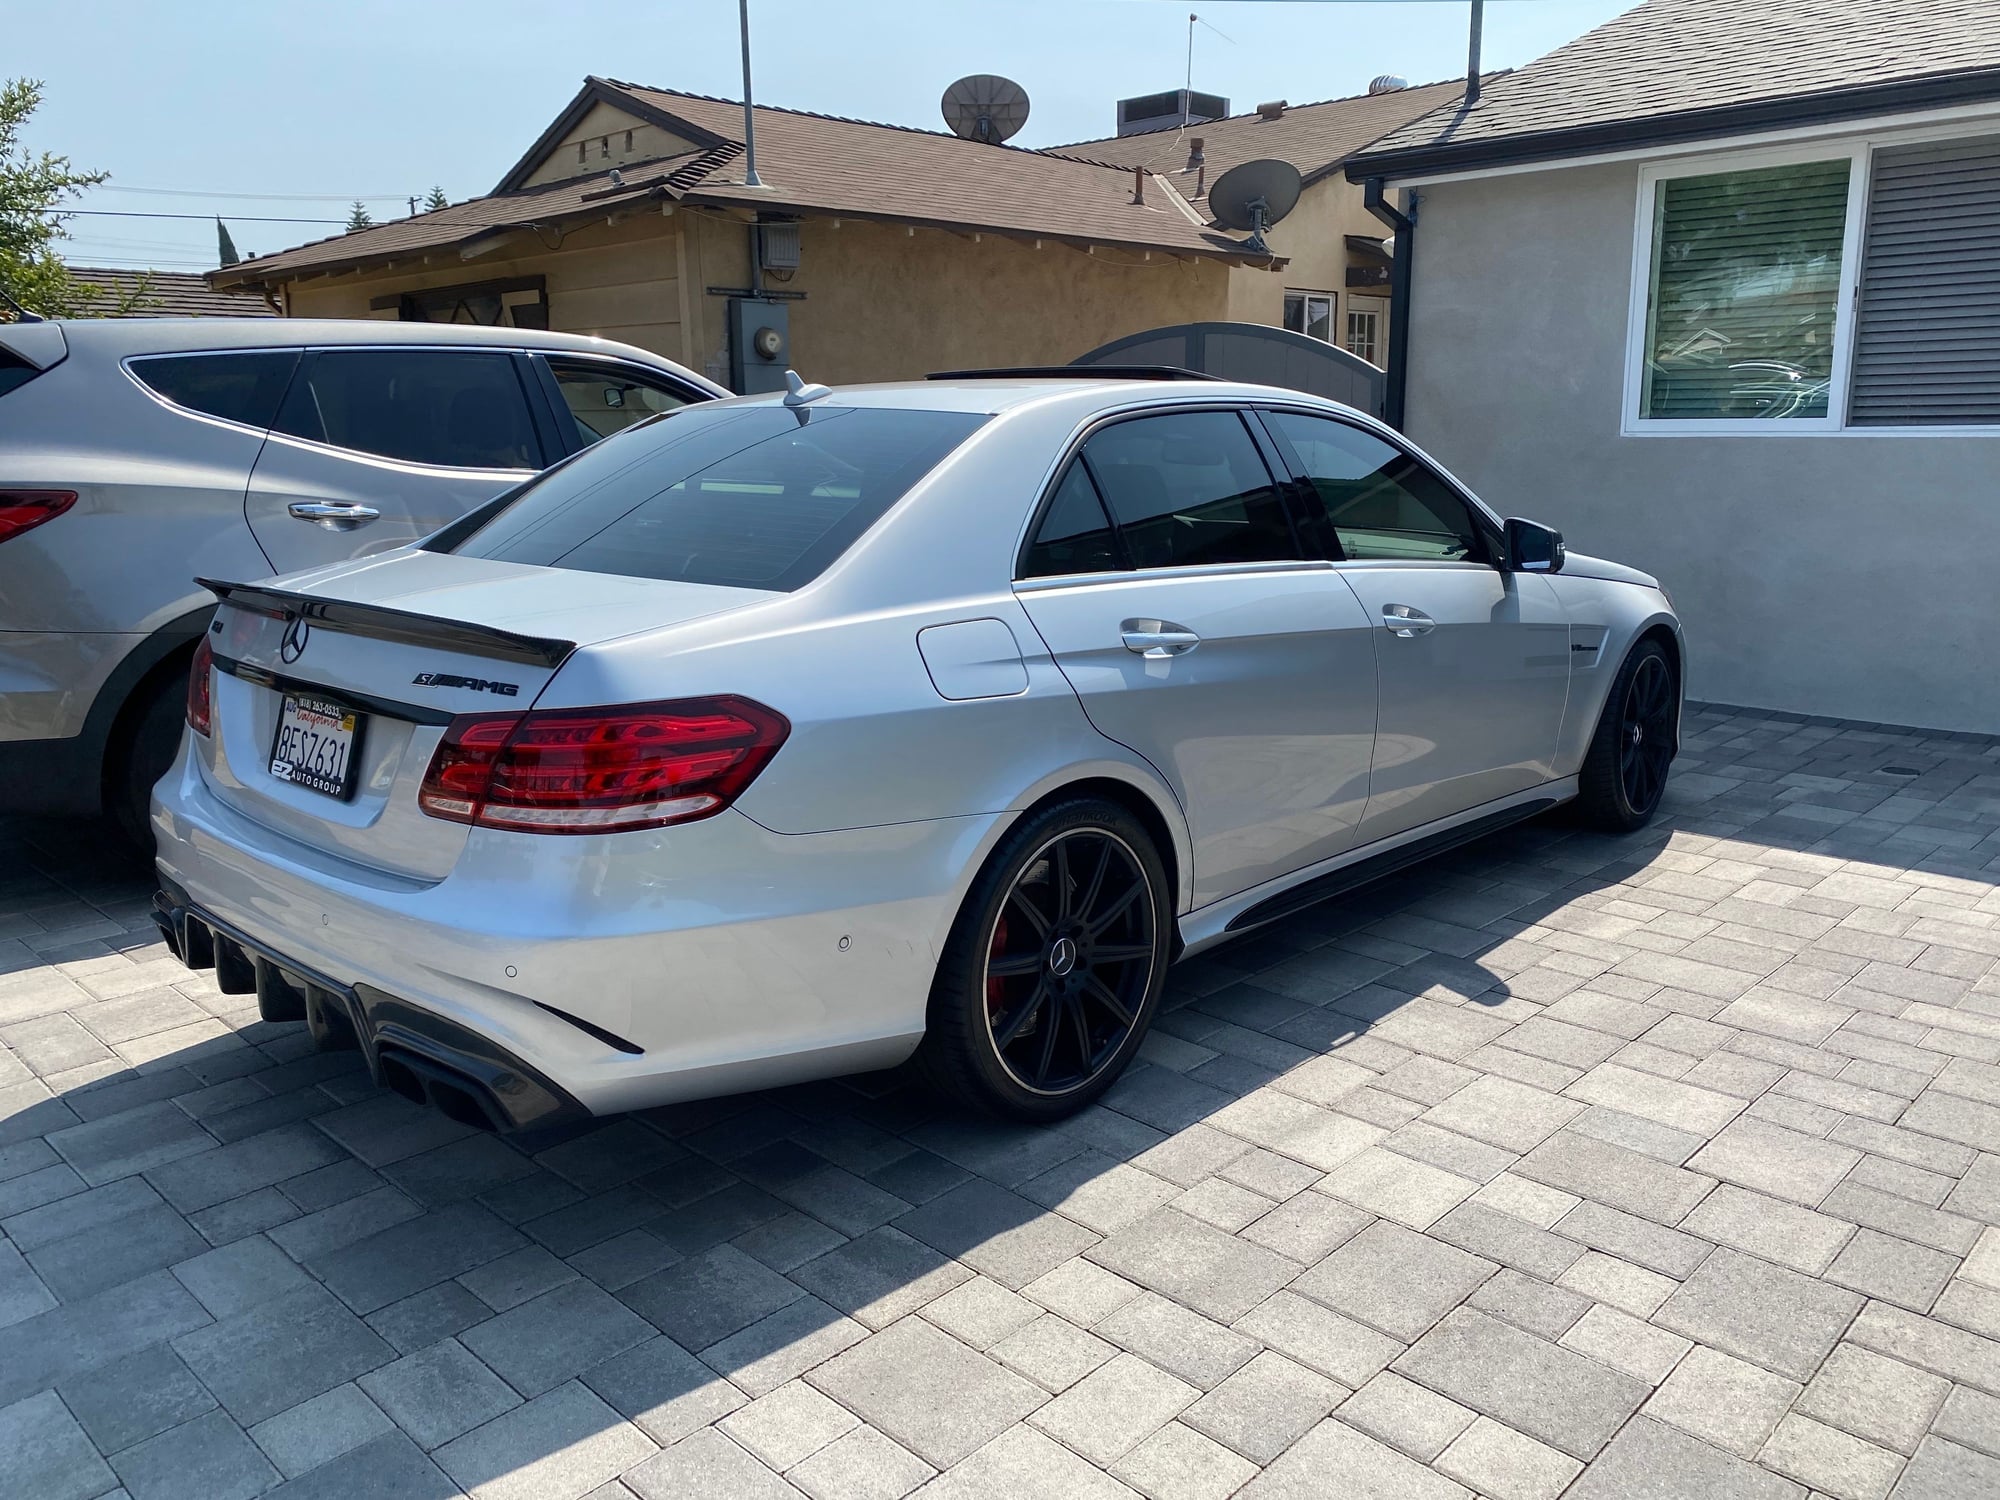 2014 Mercedes-Benz E63 AMG S - 2014 E63S Mint Condition 57k Miles! CPO Until July 2021 Transferable! - Used - Van Nuys, AR 91405, United States